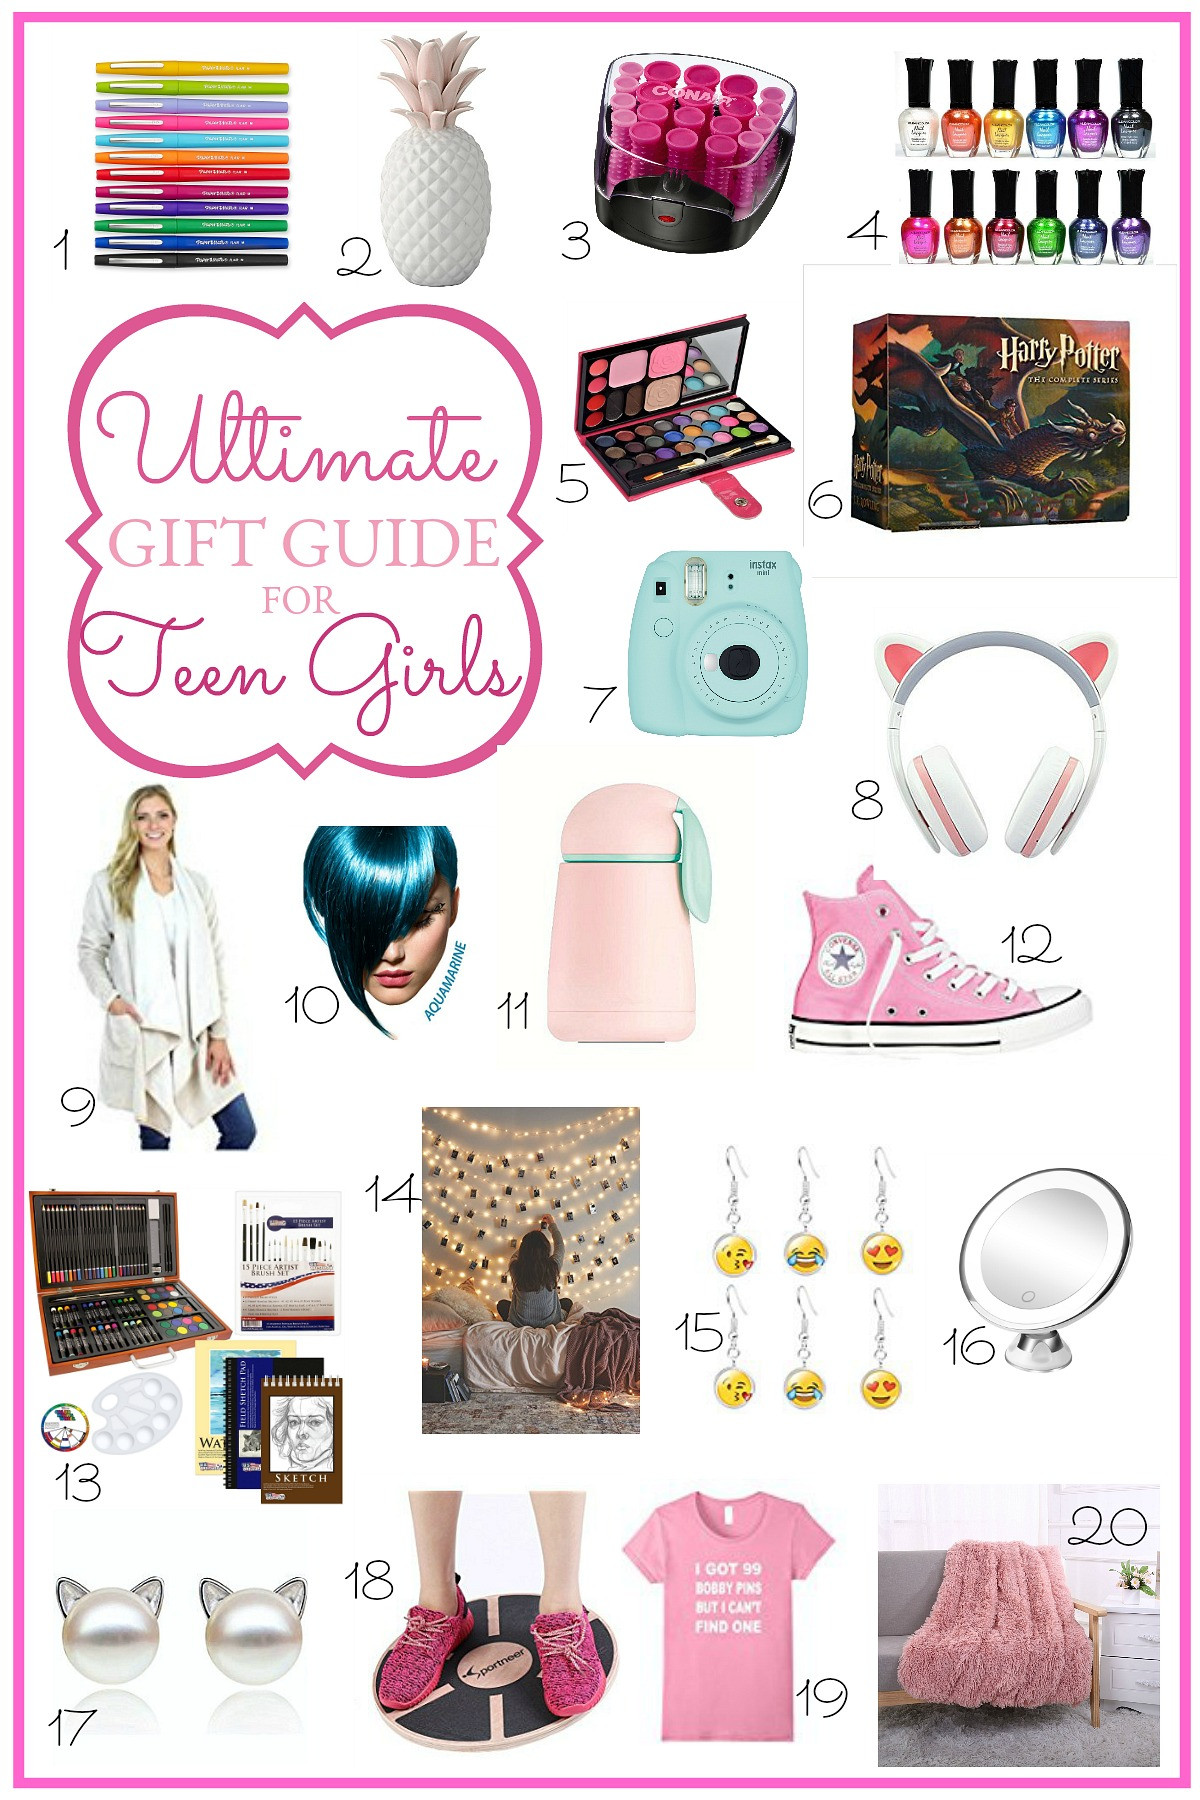 Teen Girl Birthday Gift Ideas
 Ultimate Holiday Gift Guide for Teen Girls